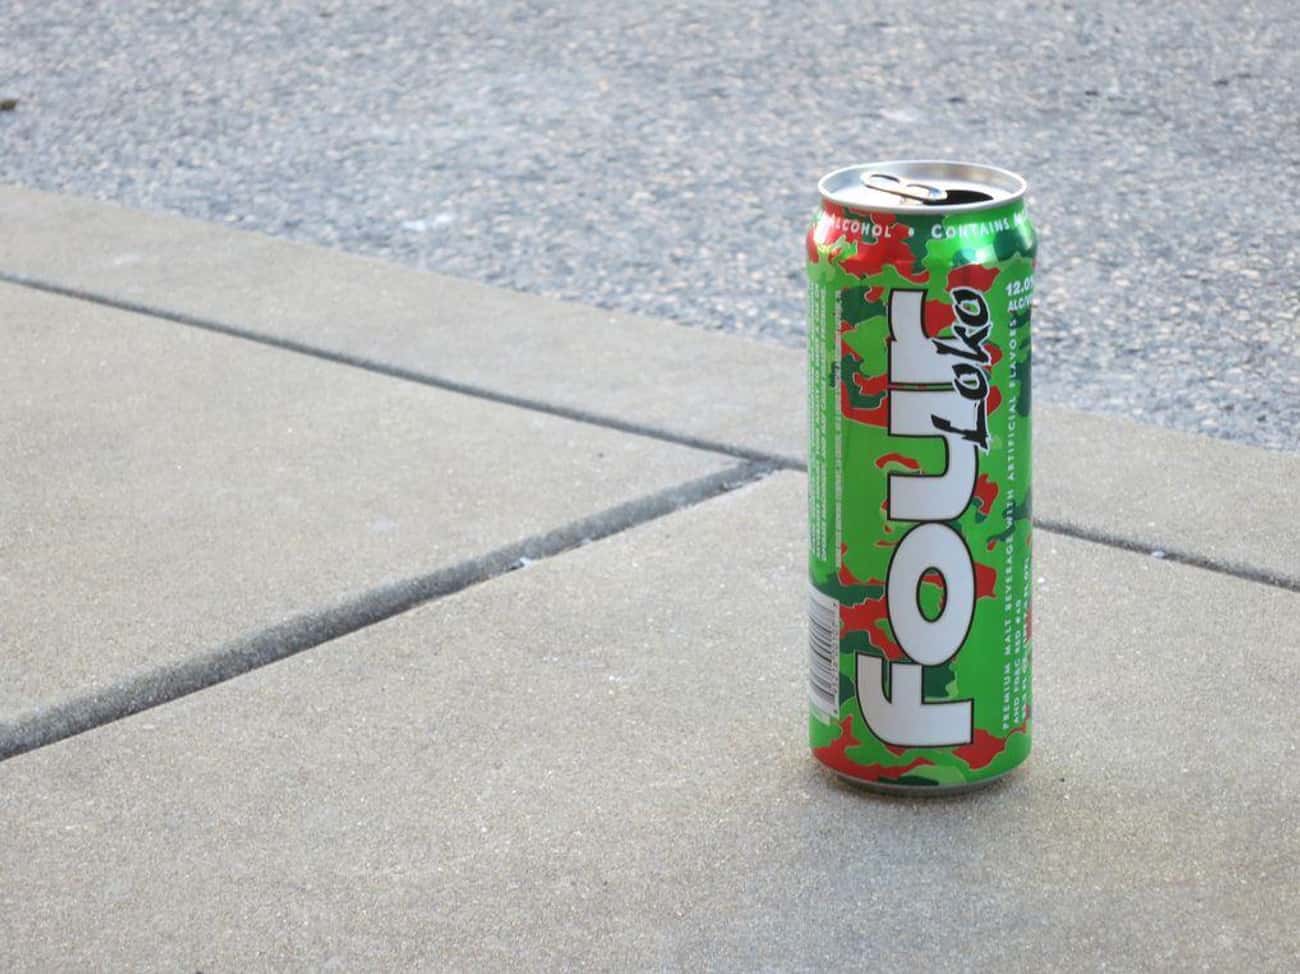 An FDA Warning Resulted in Four Loko Removing Some of Its Ingredients